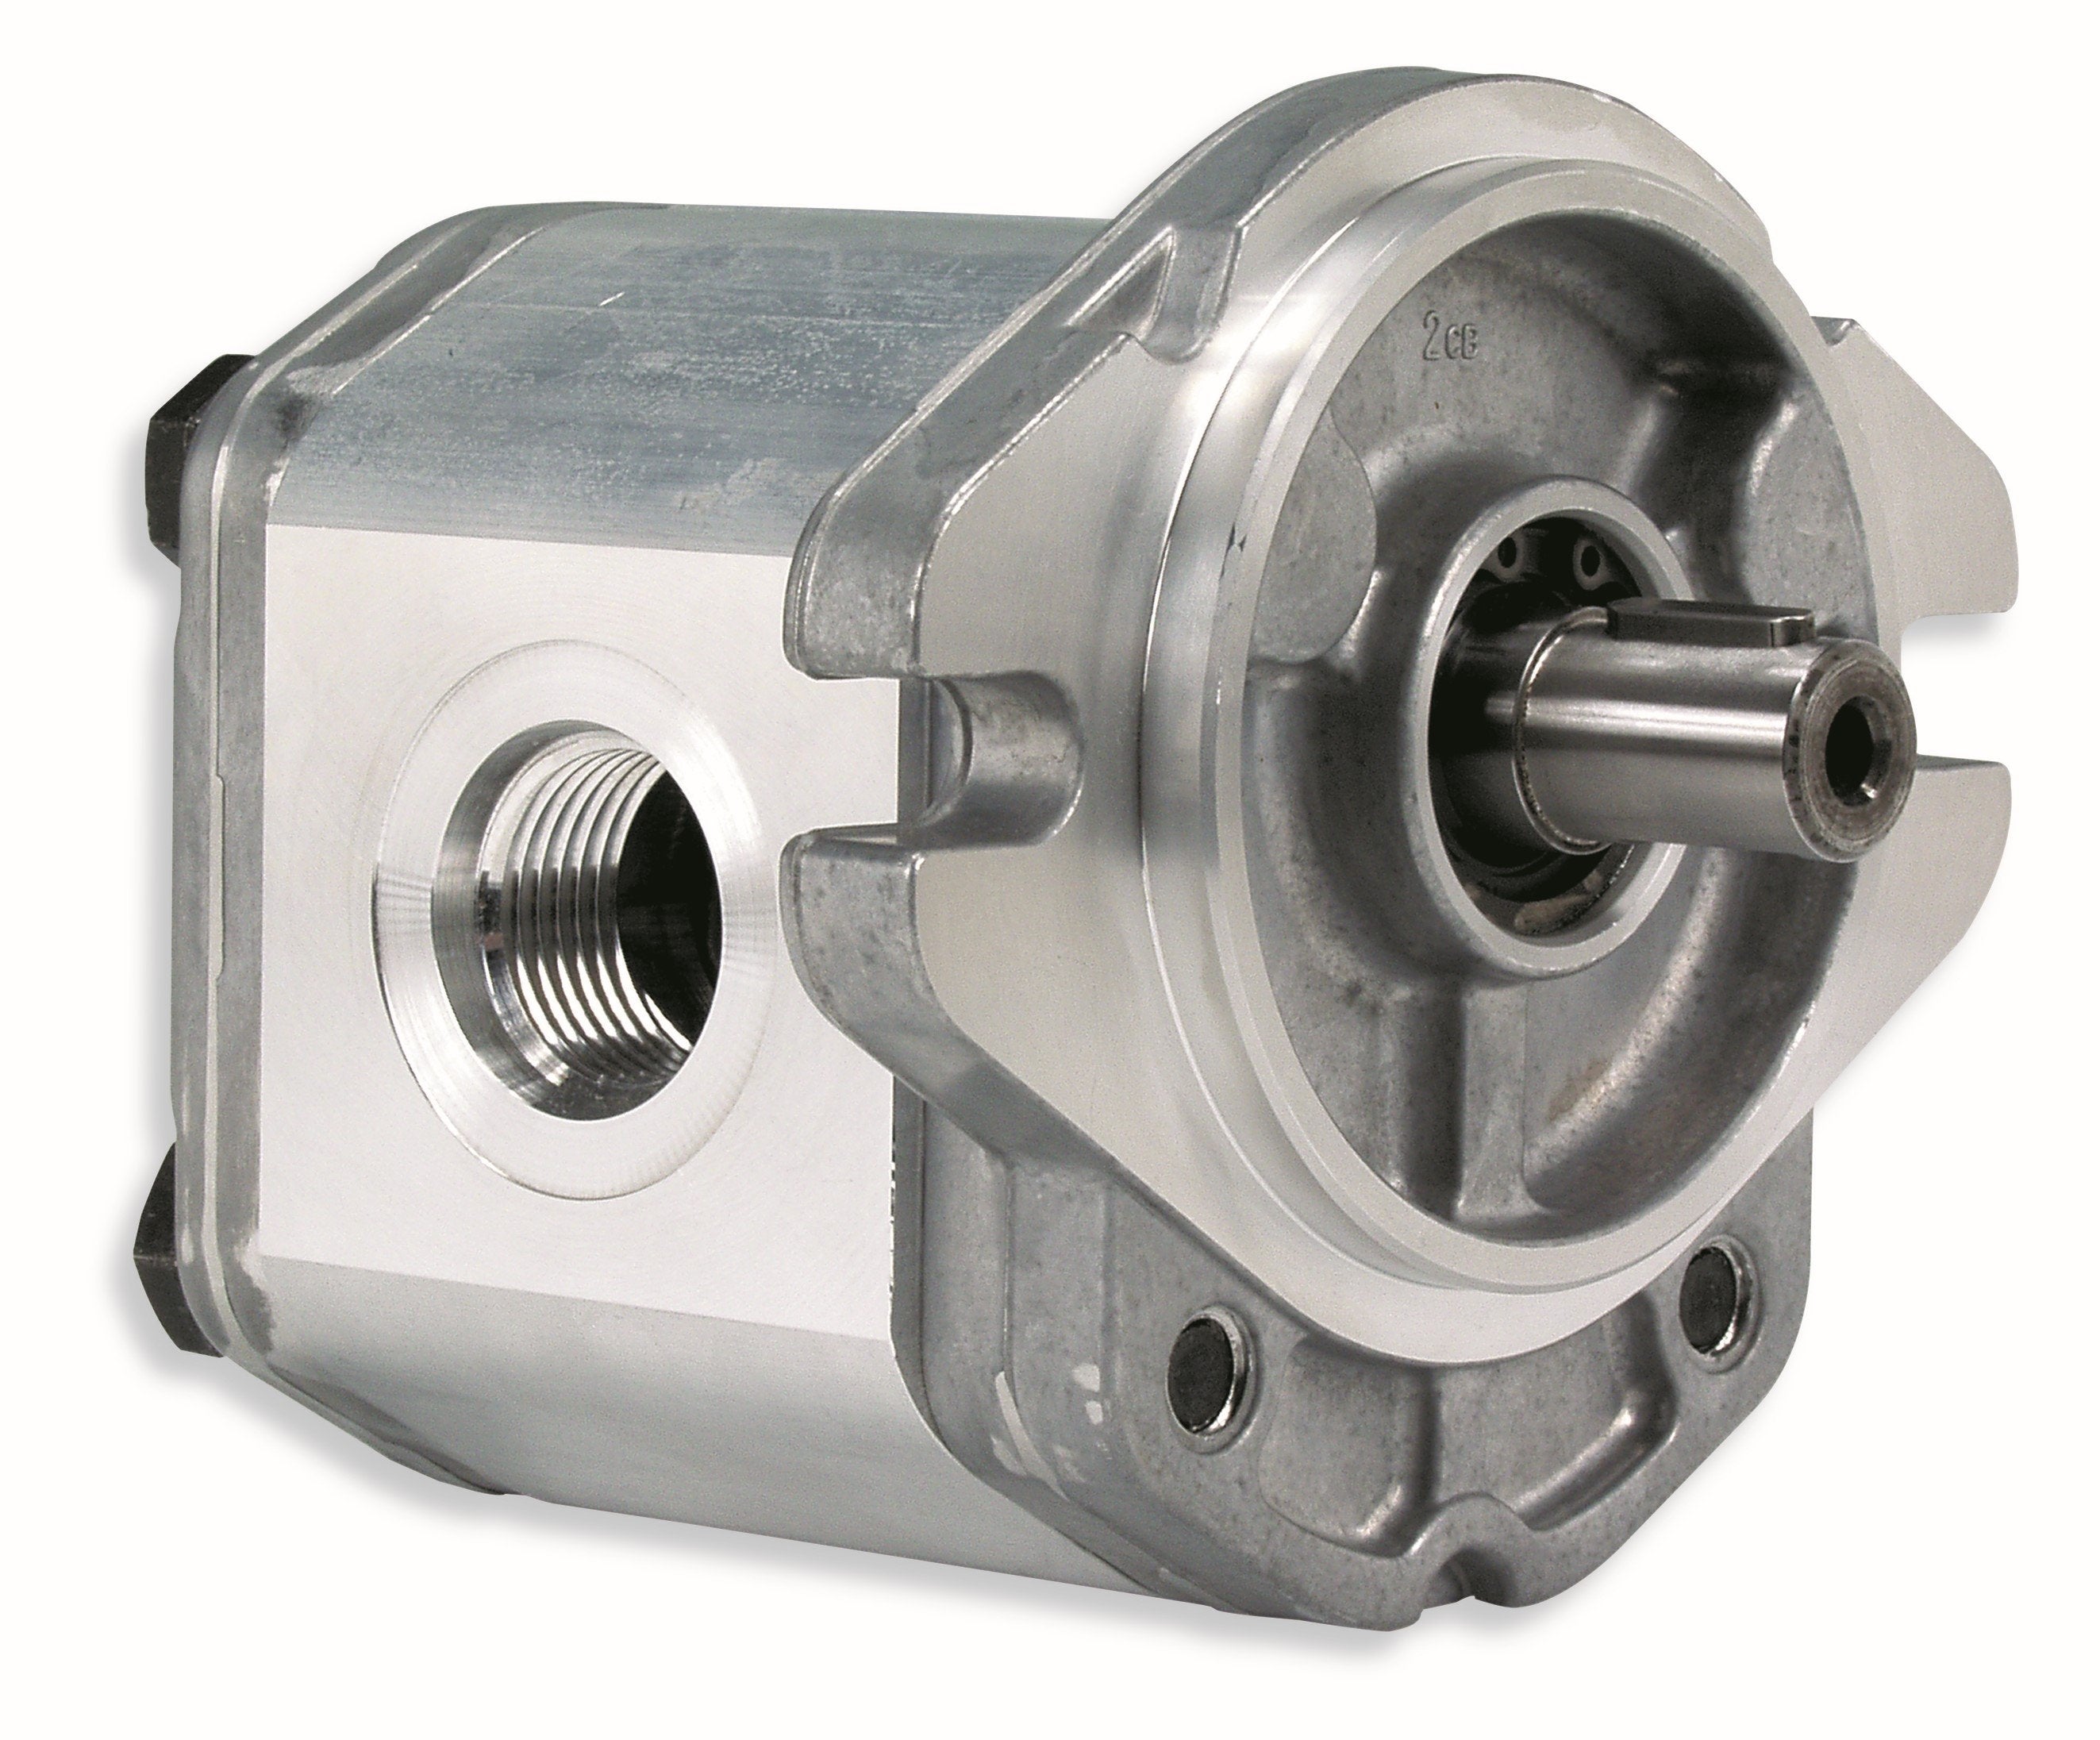 GHM3A-R-50-E4 : Marzocchi Gear Motor, Bidirectional, 33cc, 3915psi rated, 3300RPM, 1" Code 61 ports, 7/8" Bore x 1/4" Keyed Shaft